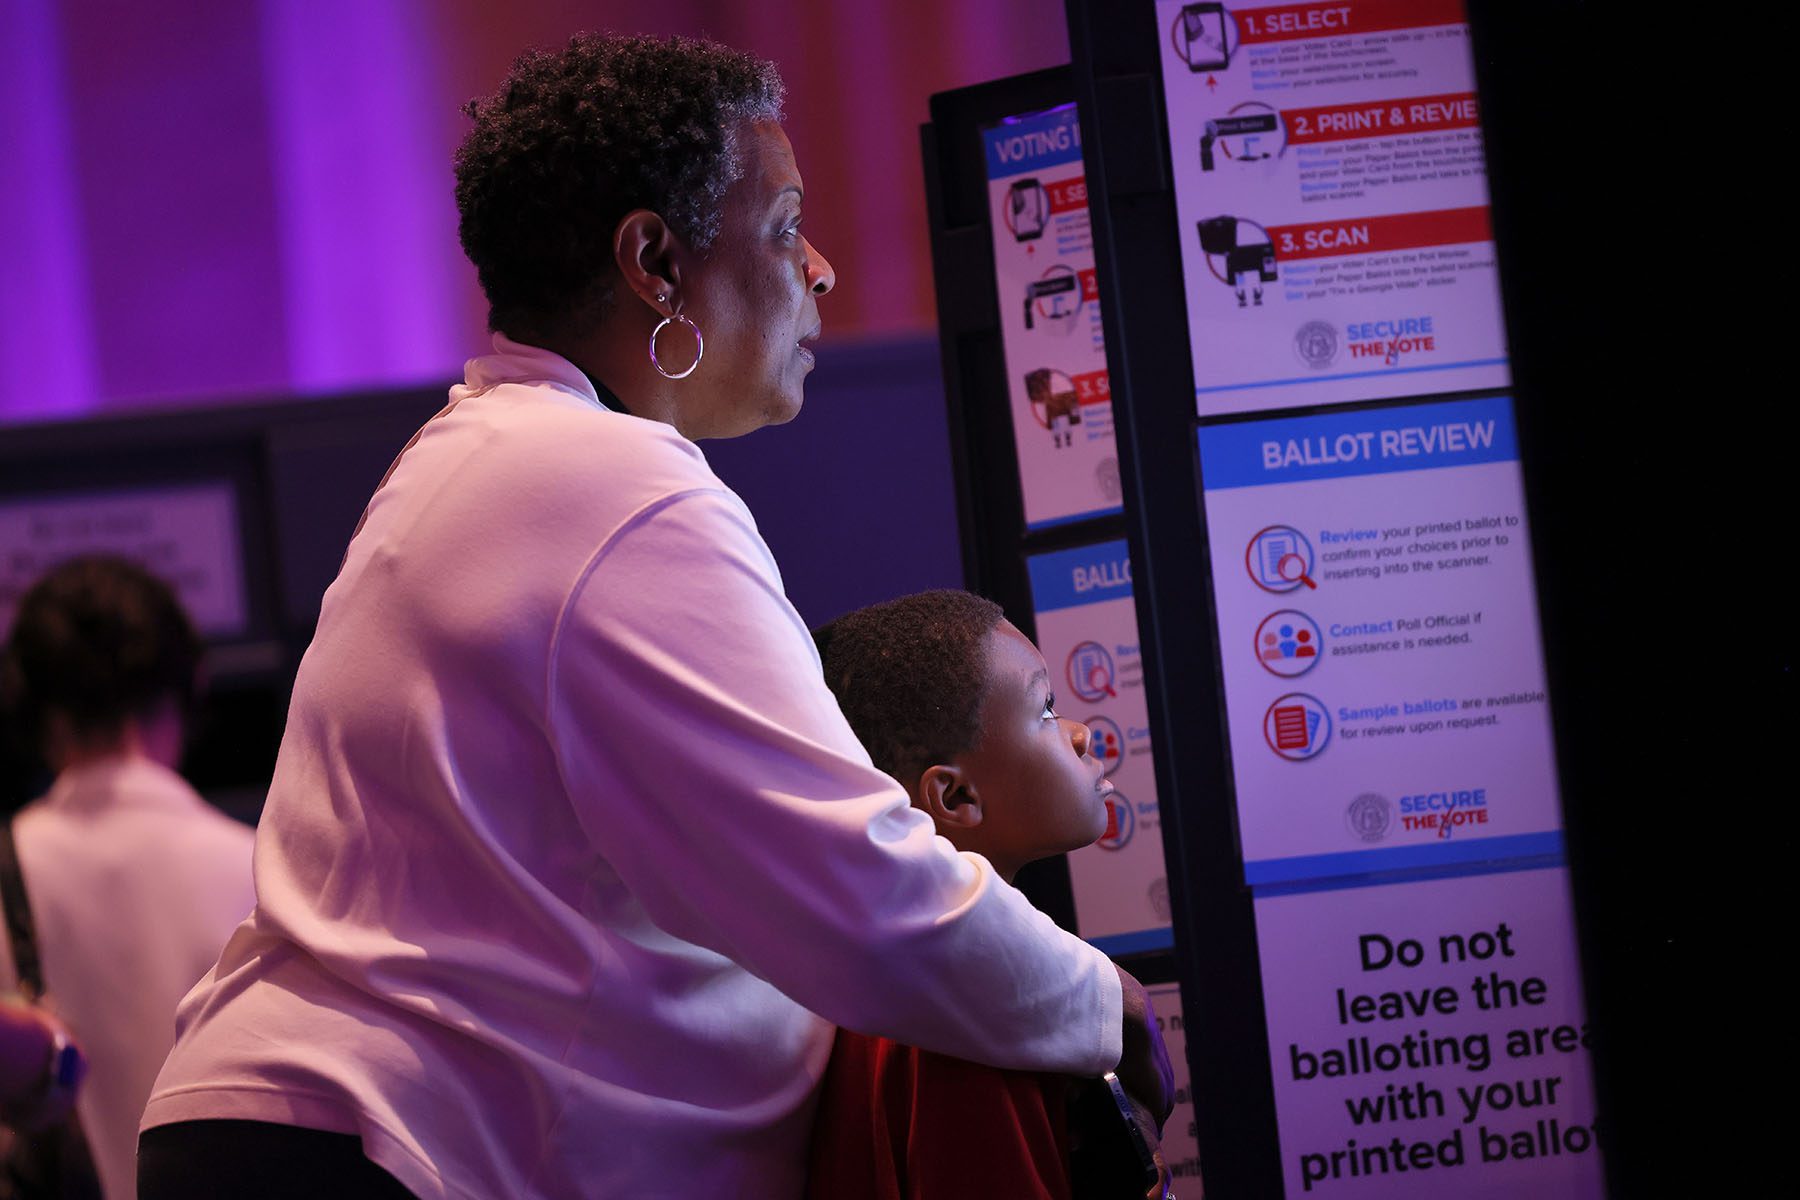 A woman casts her vote while holding a child at Fox Theatre in Atlanta. The child's face is illuminated by the electronic voting screen.